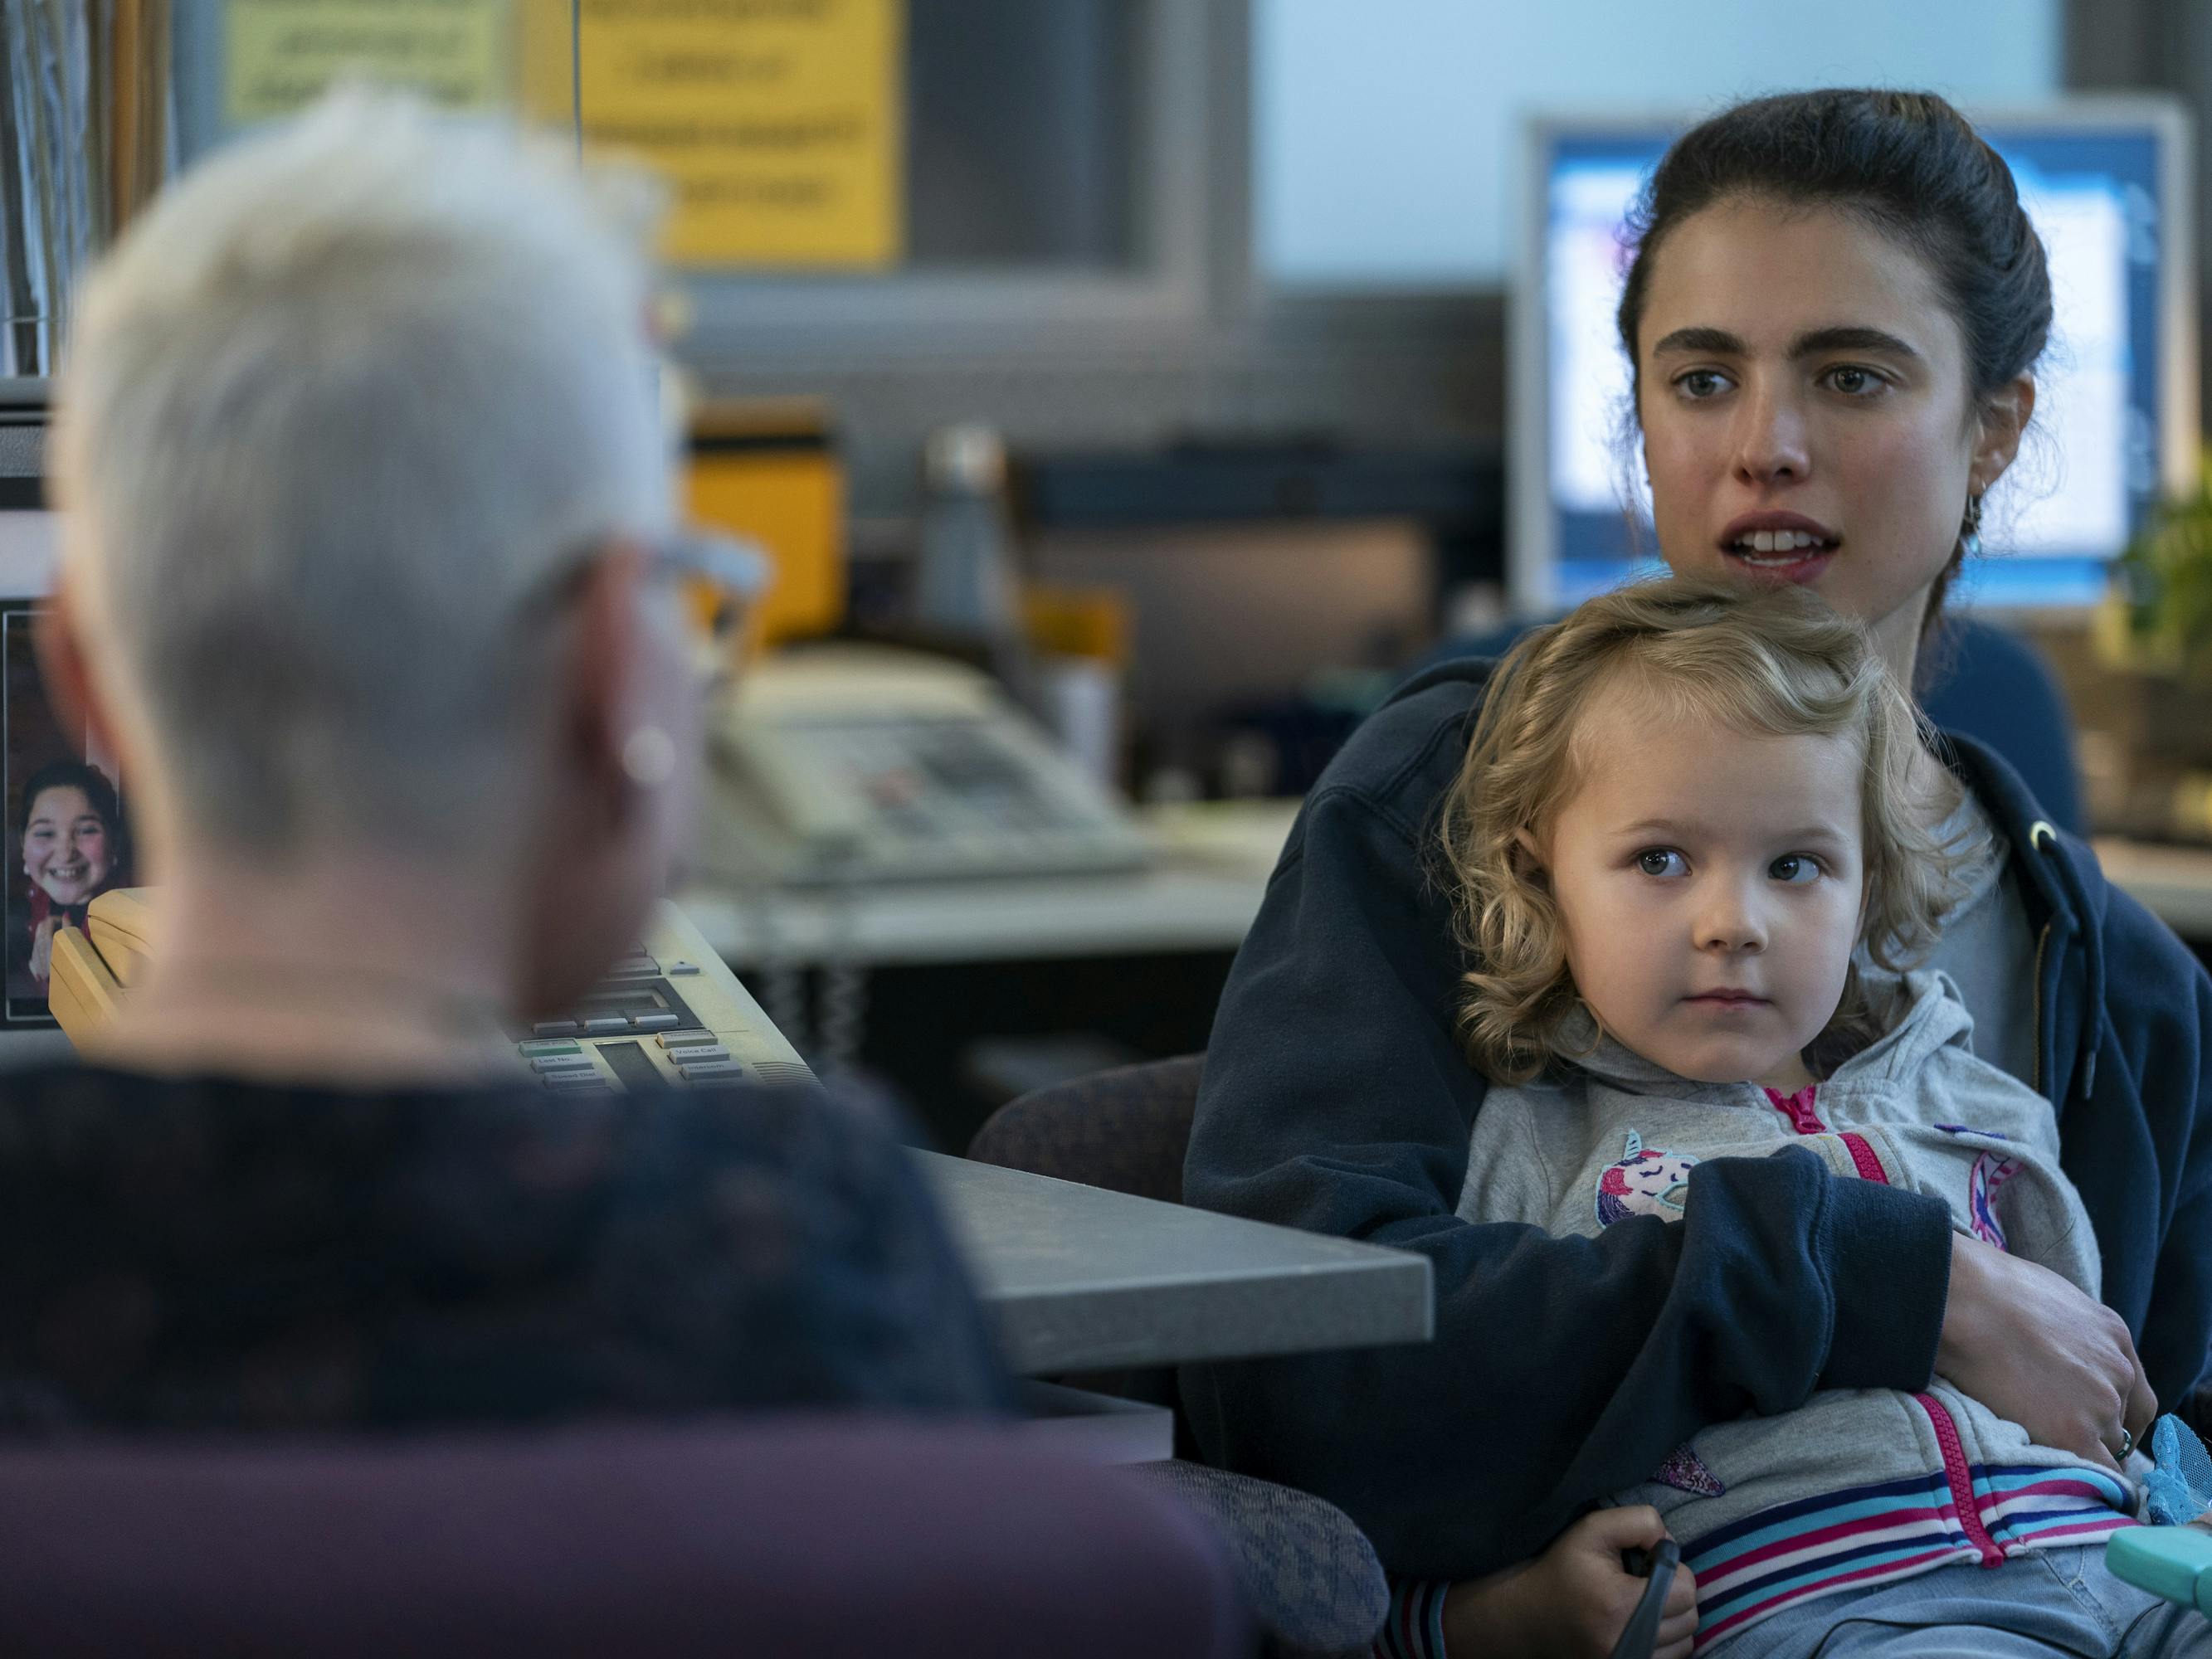 Maddy (Rylea Nevaeh Whittet) and Alex Russell (Margaret Qualley) talk to a person with short white hair in an office. Russell looks stressed and Maddy looks adorable, as per usual.